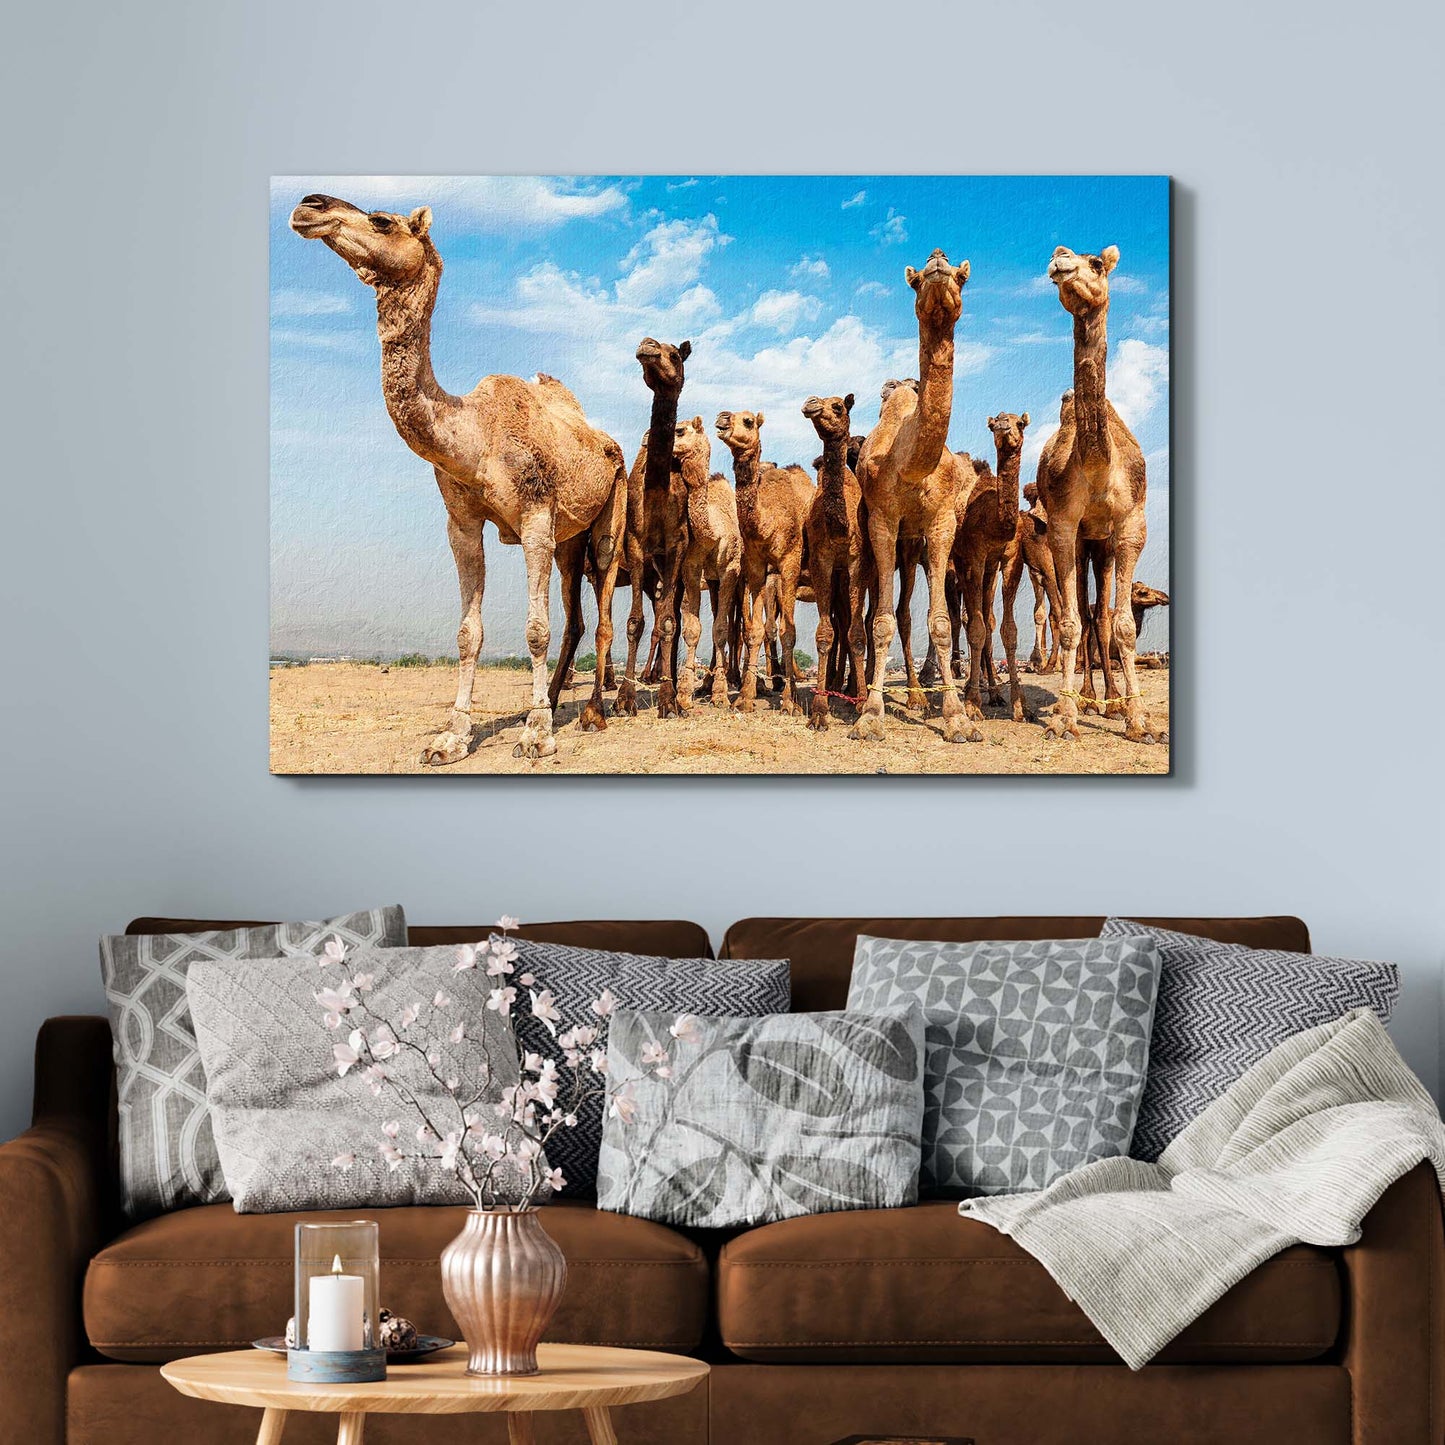 Tied Feet Camels Canvas Wall Art Style 2 - Image by Tailored Canvases